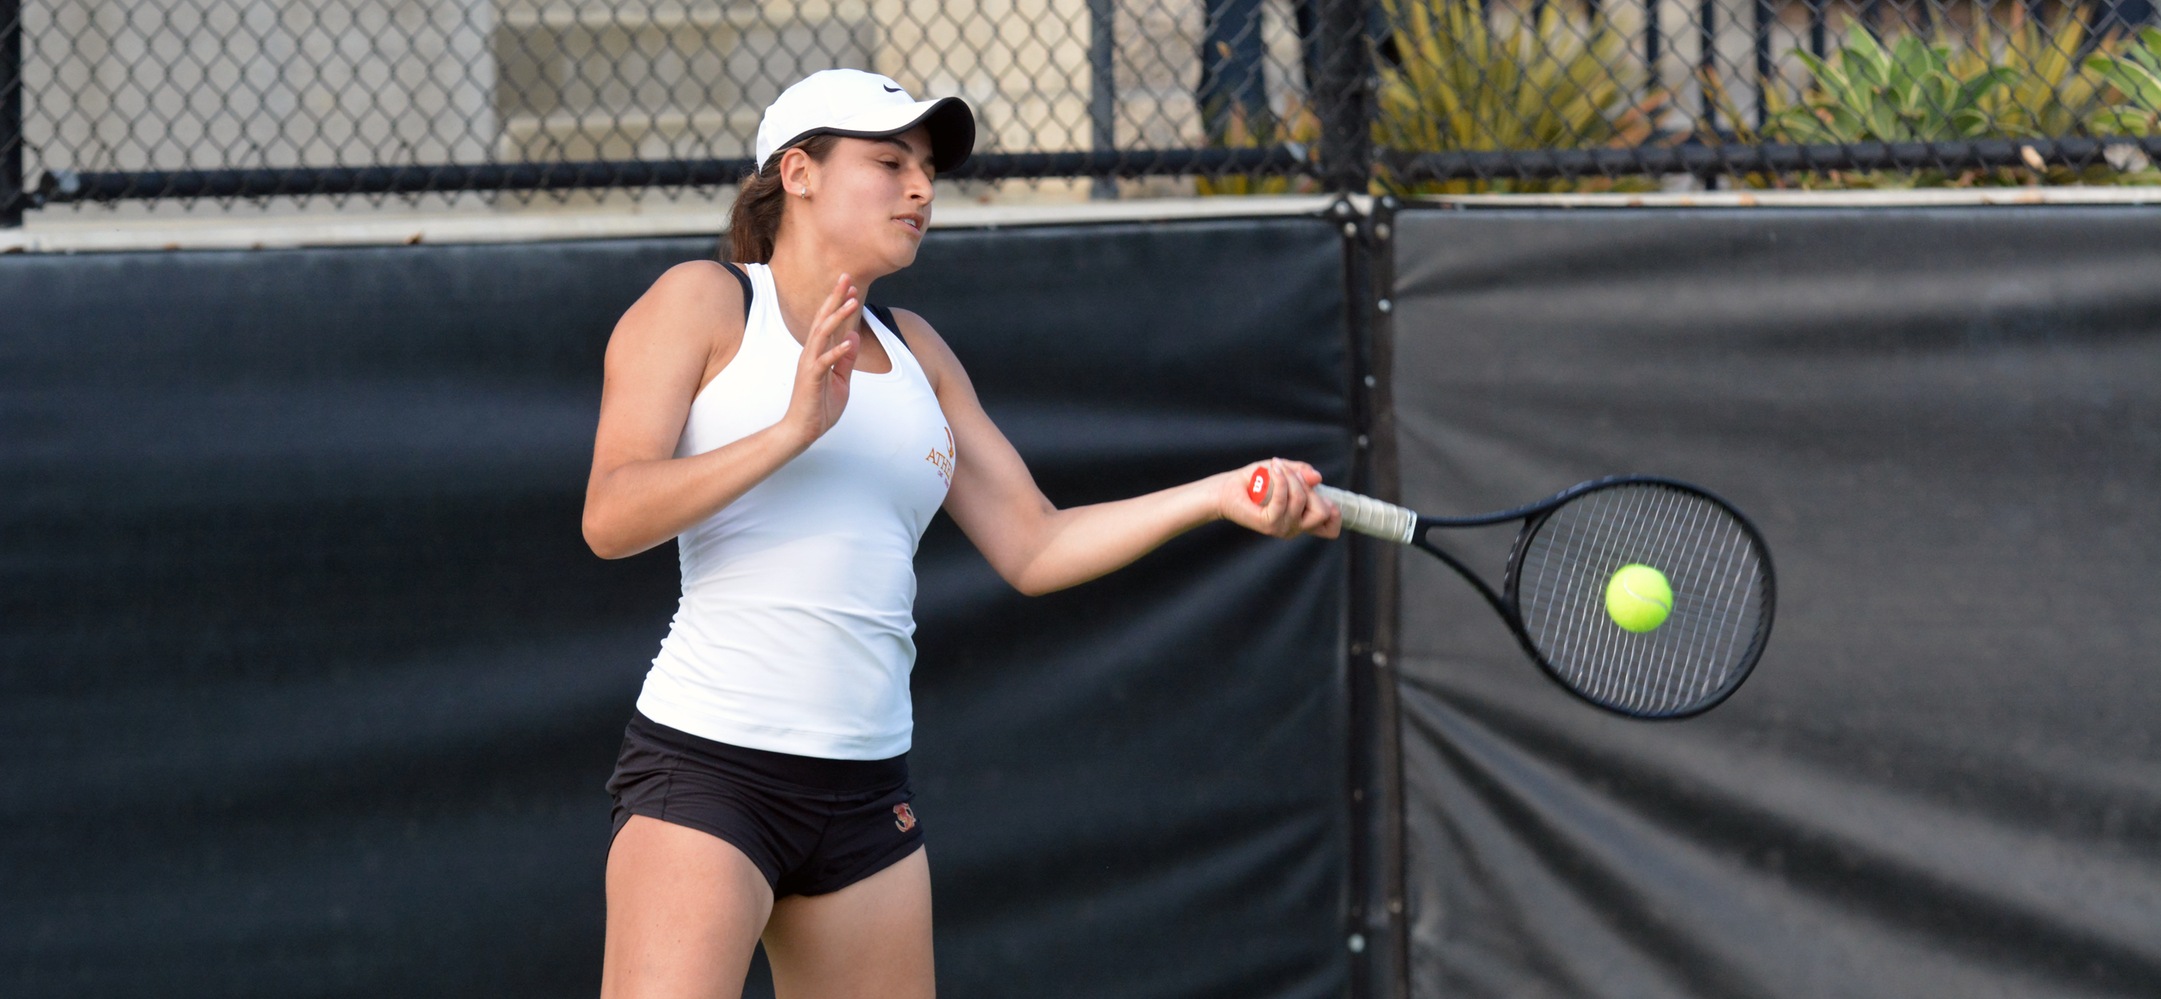 Anastasia Bryan-Ajania picked up singles wins in both matches today, winning at No. 6 vs. Tufts and No. 3 vs. Babson